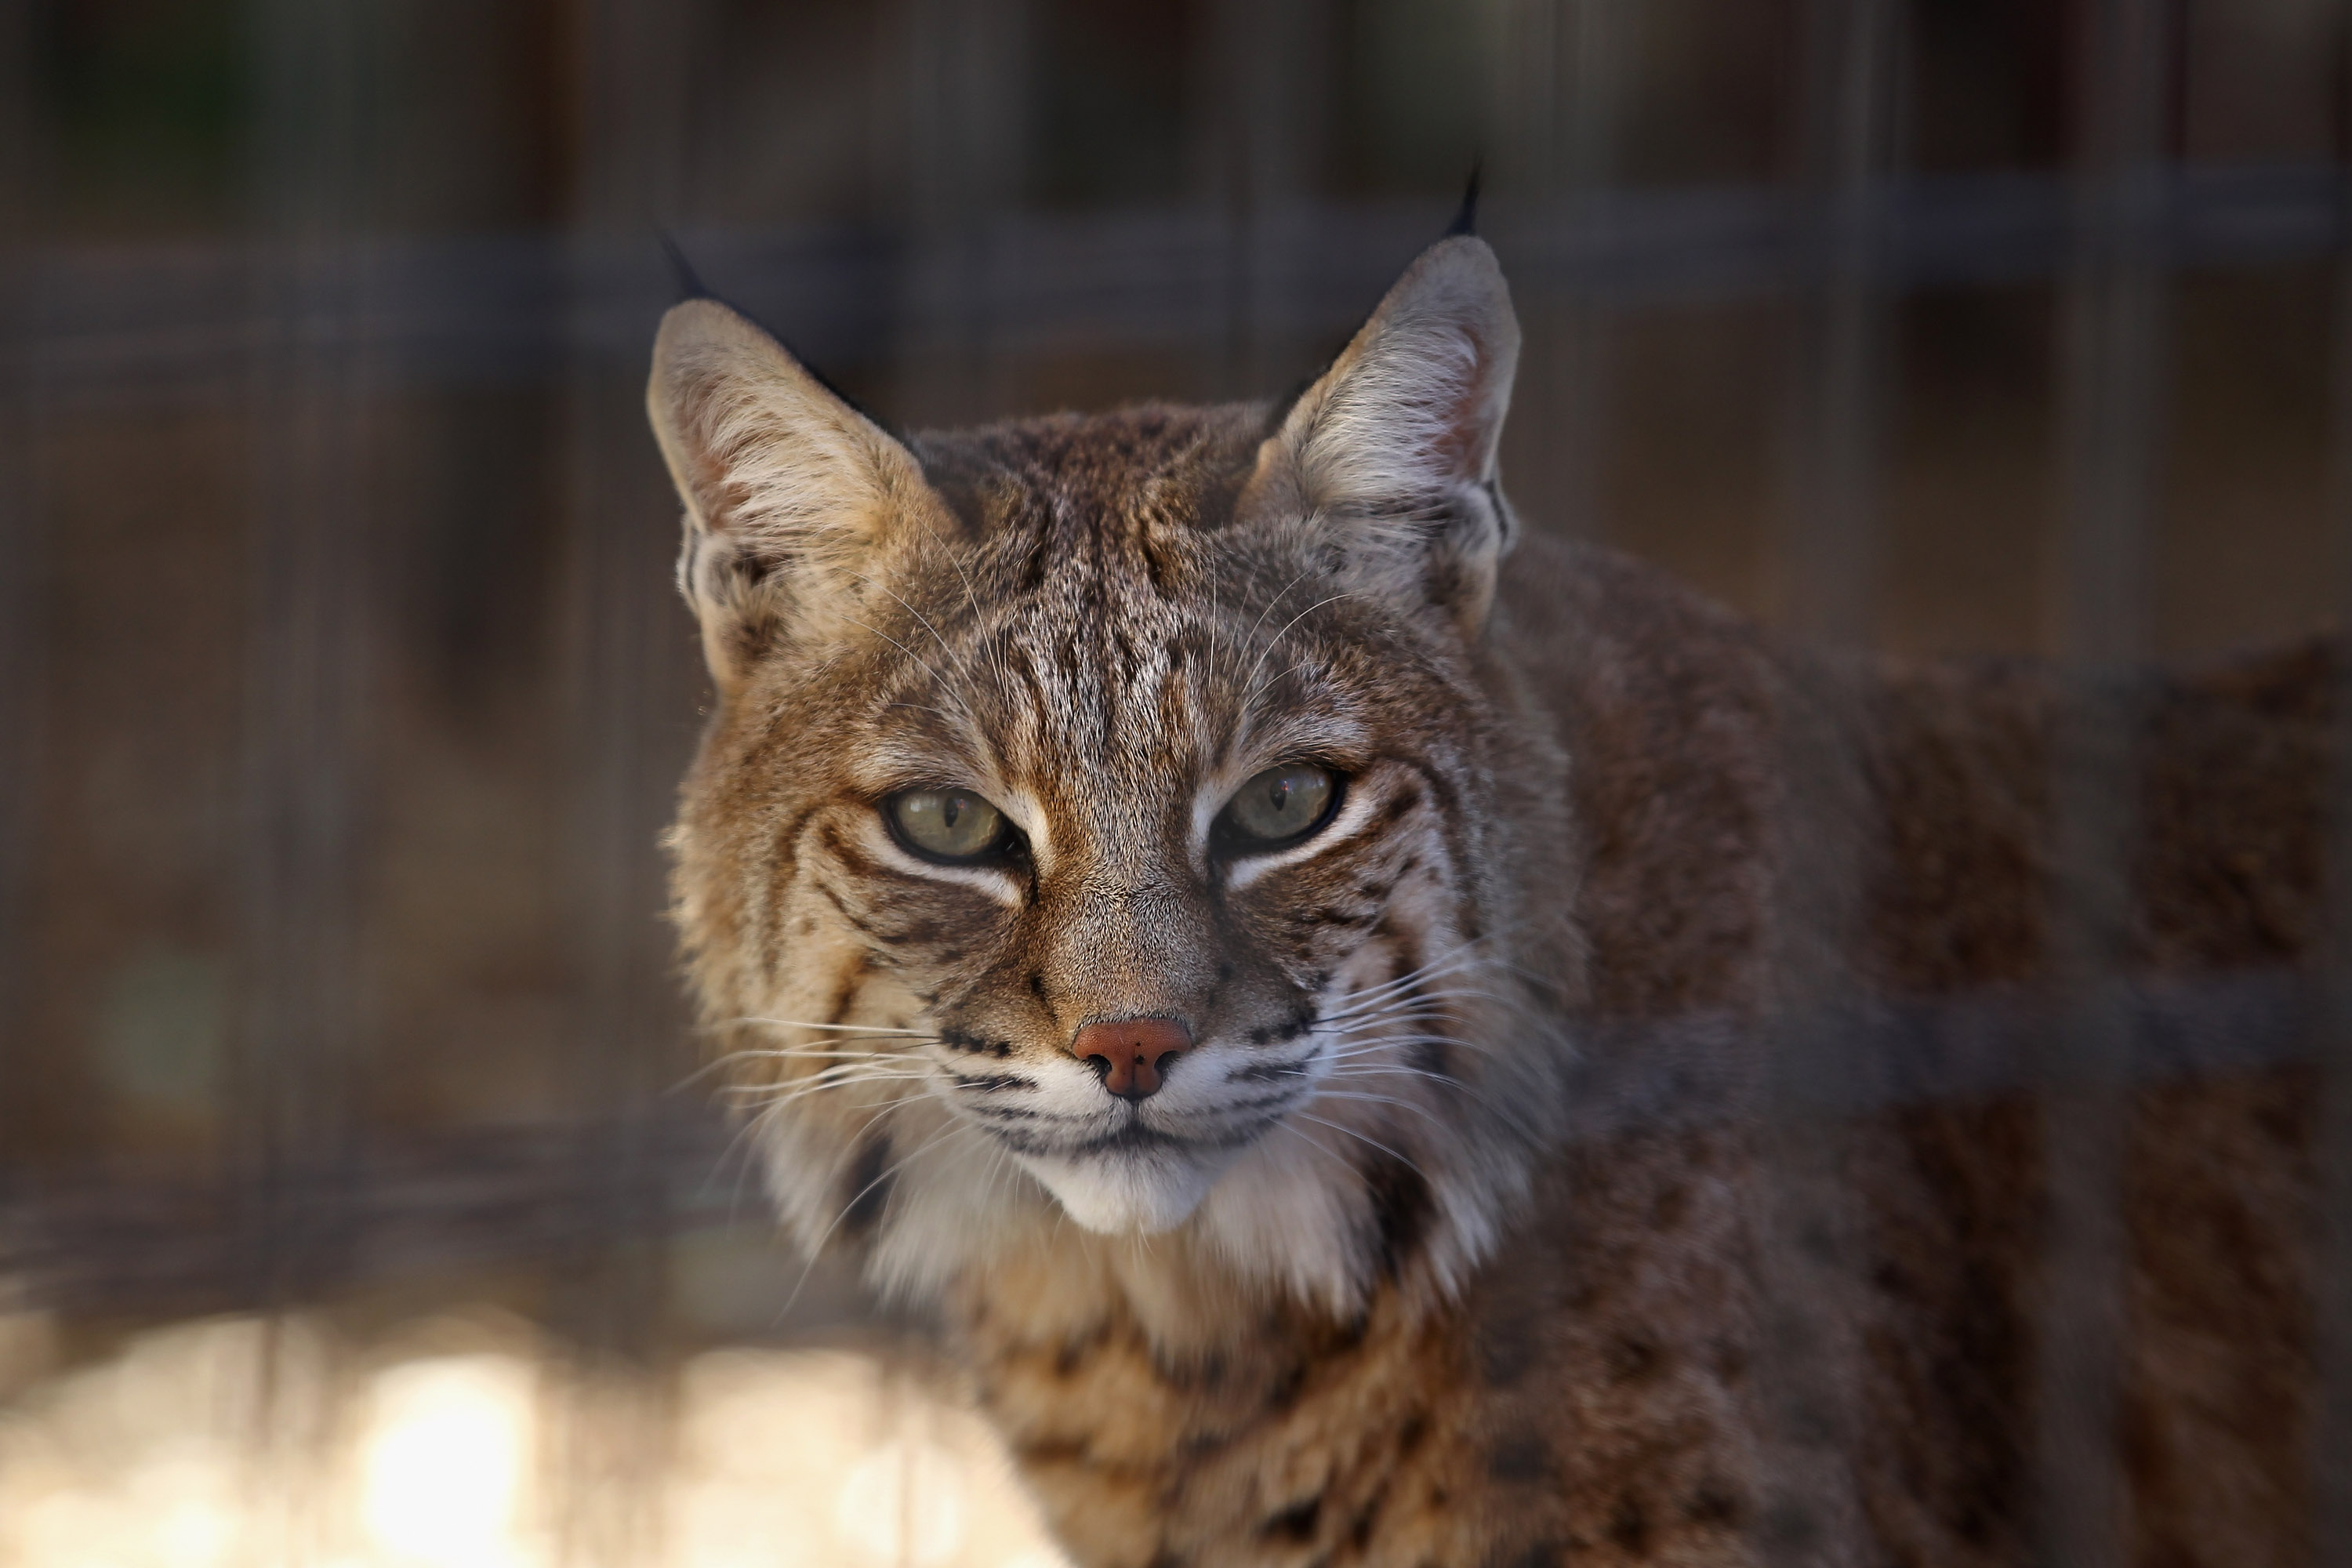 A reported 1,500 bobcats were trapped in desert areas last year, according to Fish and Game officials. (Photo by John Moore/Getty Images) 